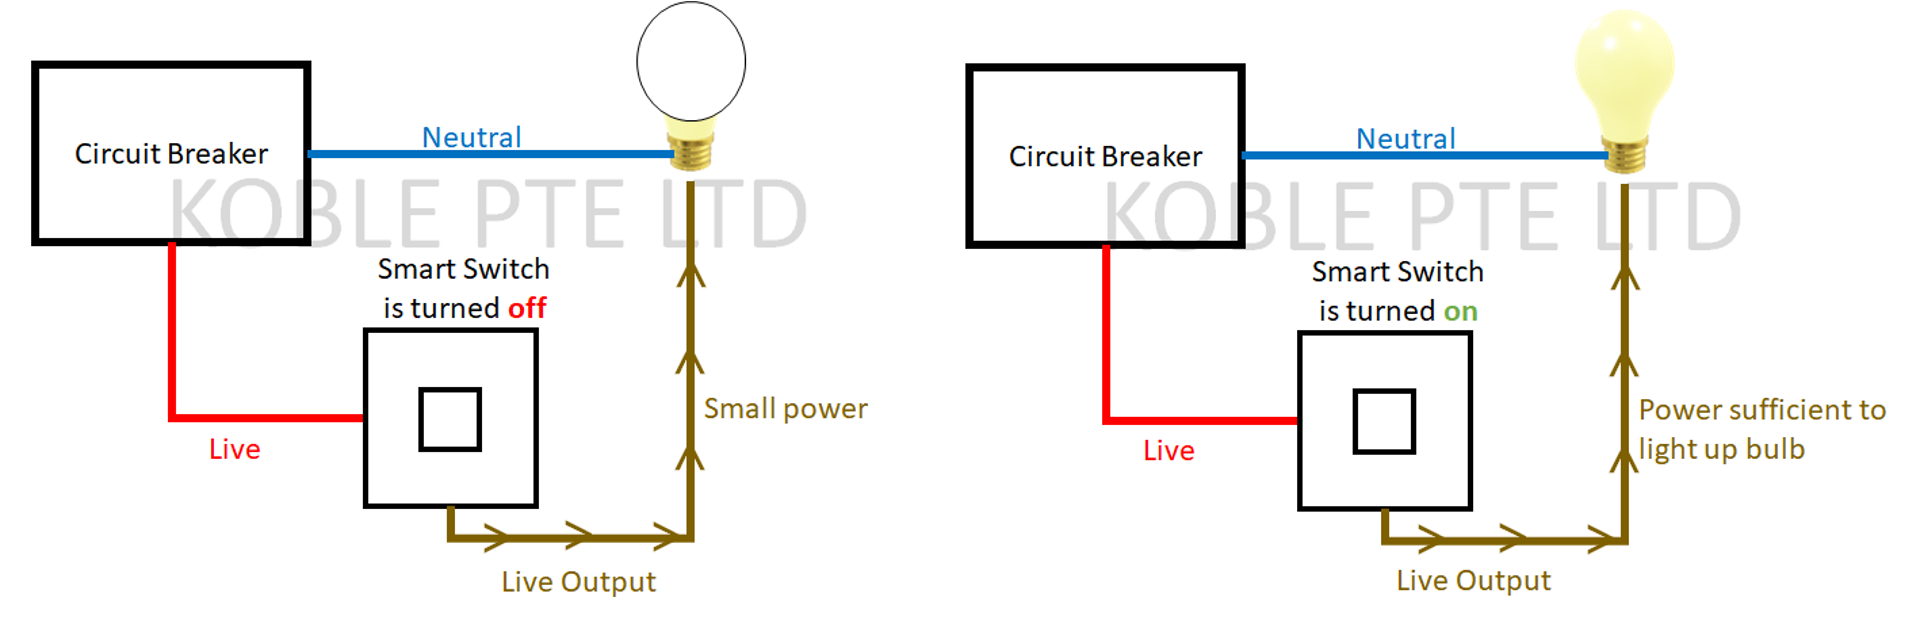 Wiring diagram of a smart switch when turned off and turned on